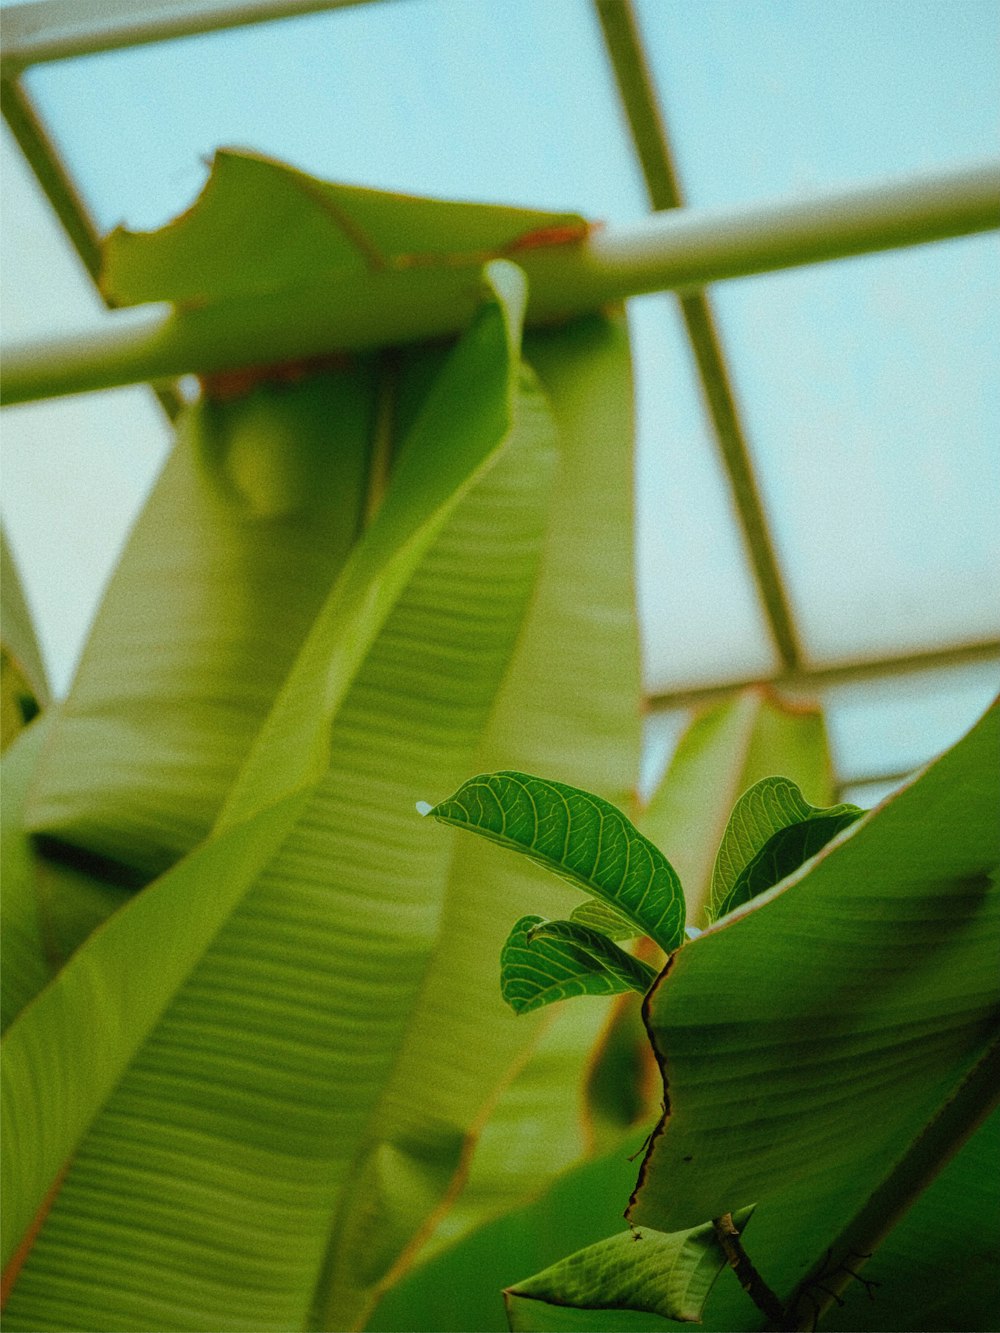 a banana tree with a green leafy plant in the foreground